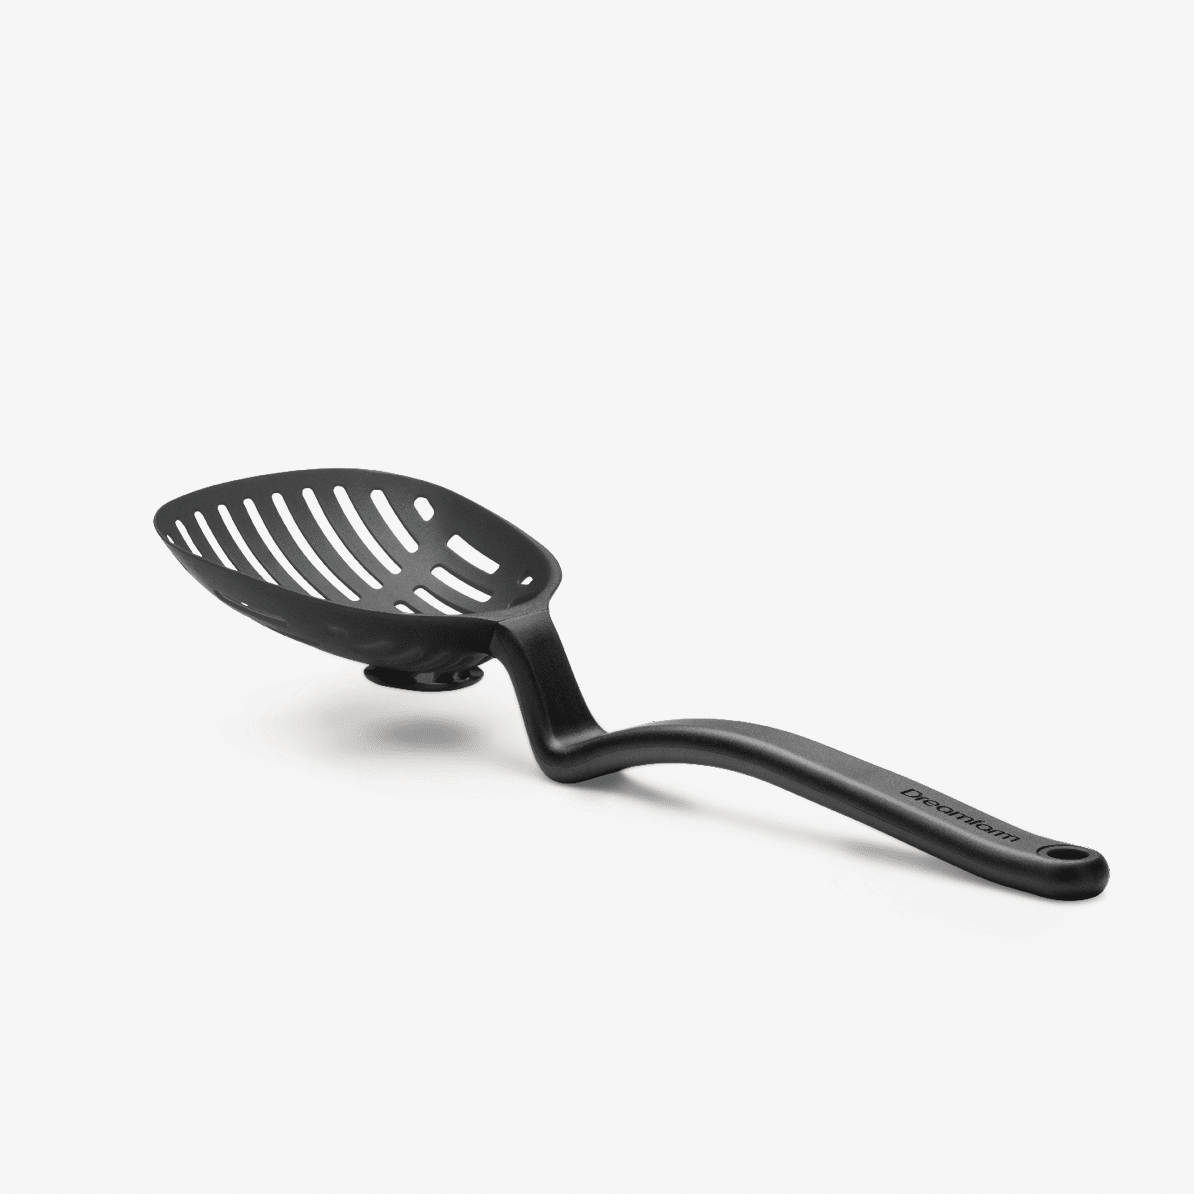 The Lestrain is a large nylon scoop strainer.  Heat resistant and dishwasher safe. The large head sits up off the counter due to a bend in the sturdy handle and there's a nifty catcher underneath the slots to catch any leftover drips! 